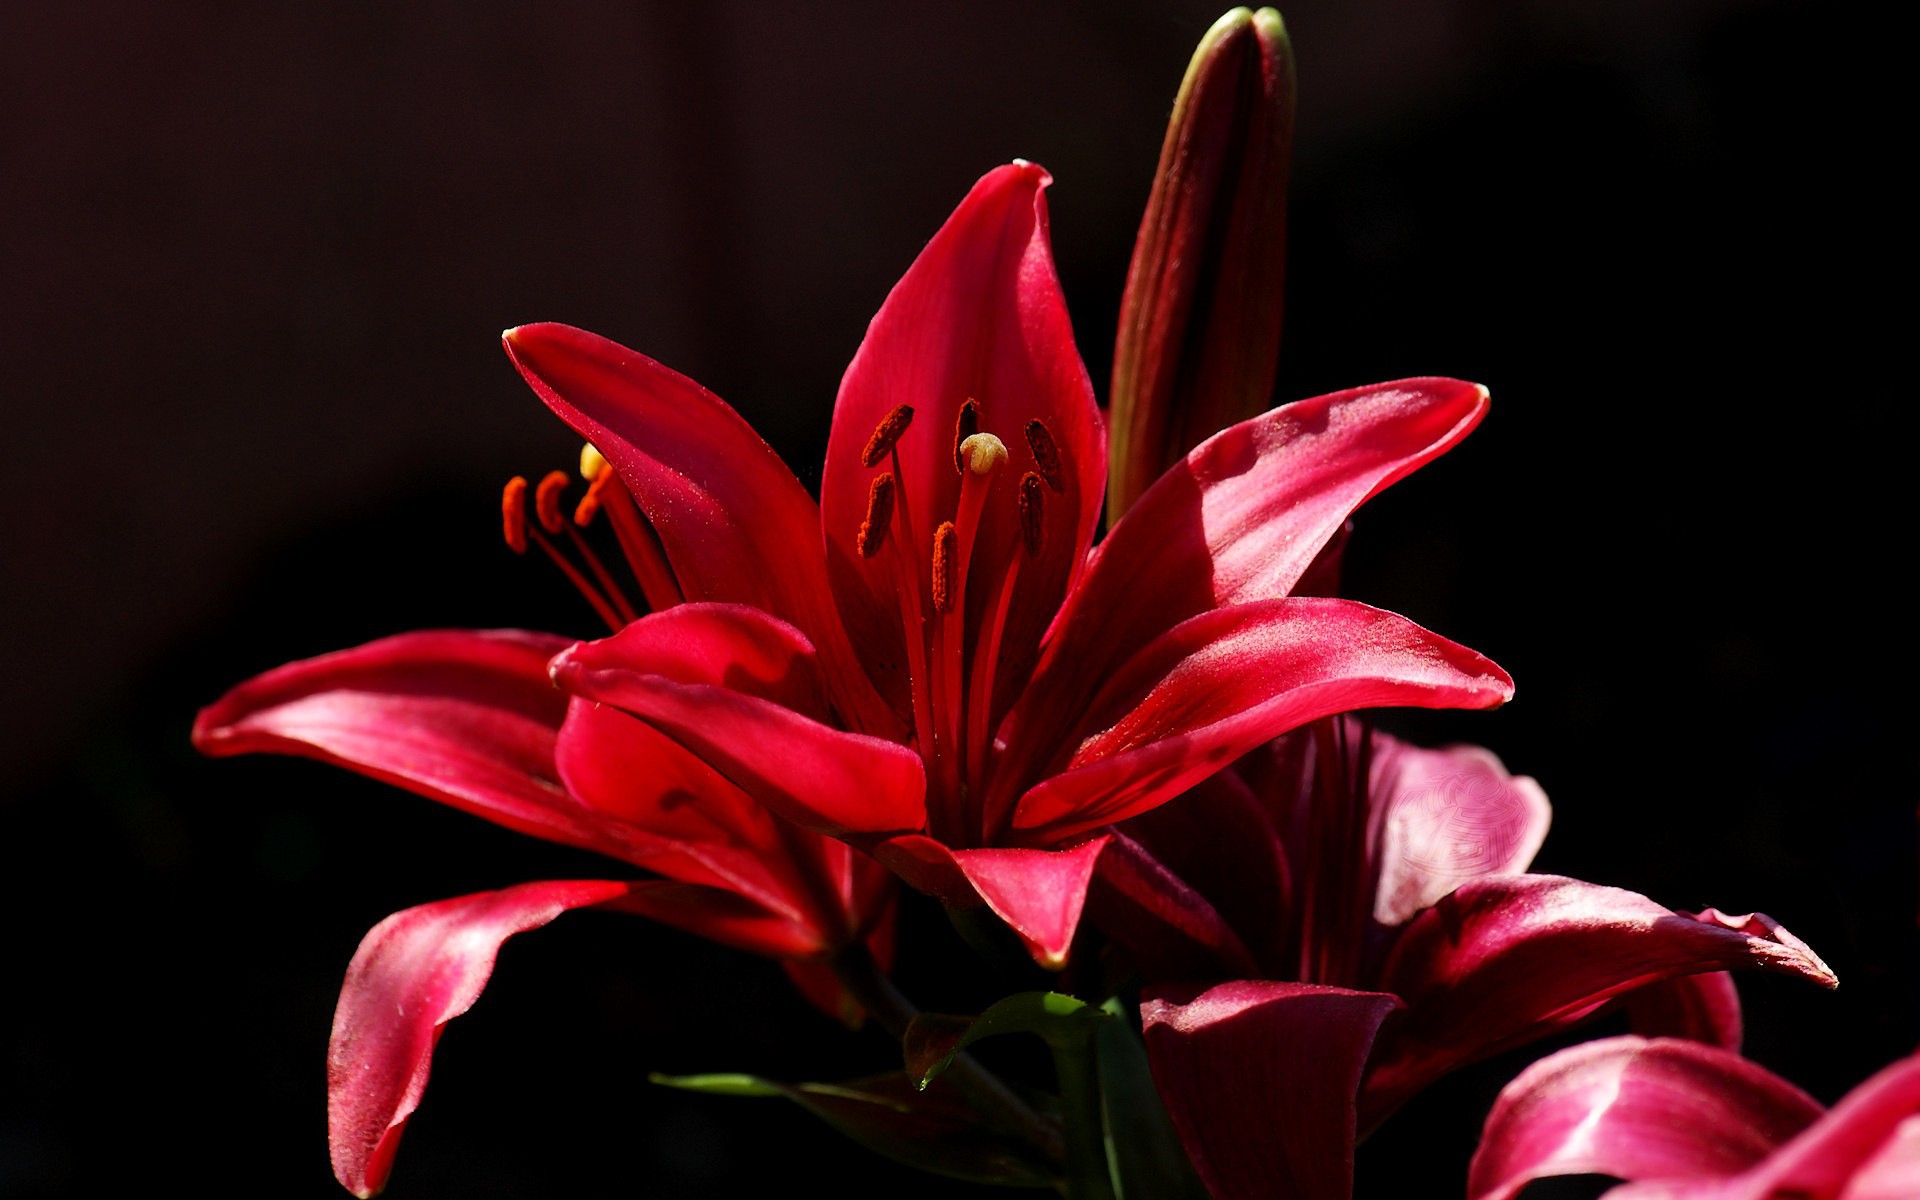 The red flower on a black background wallpapers and images - wallpapers